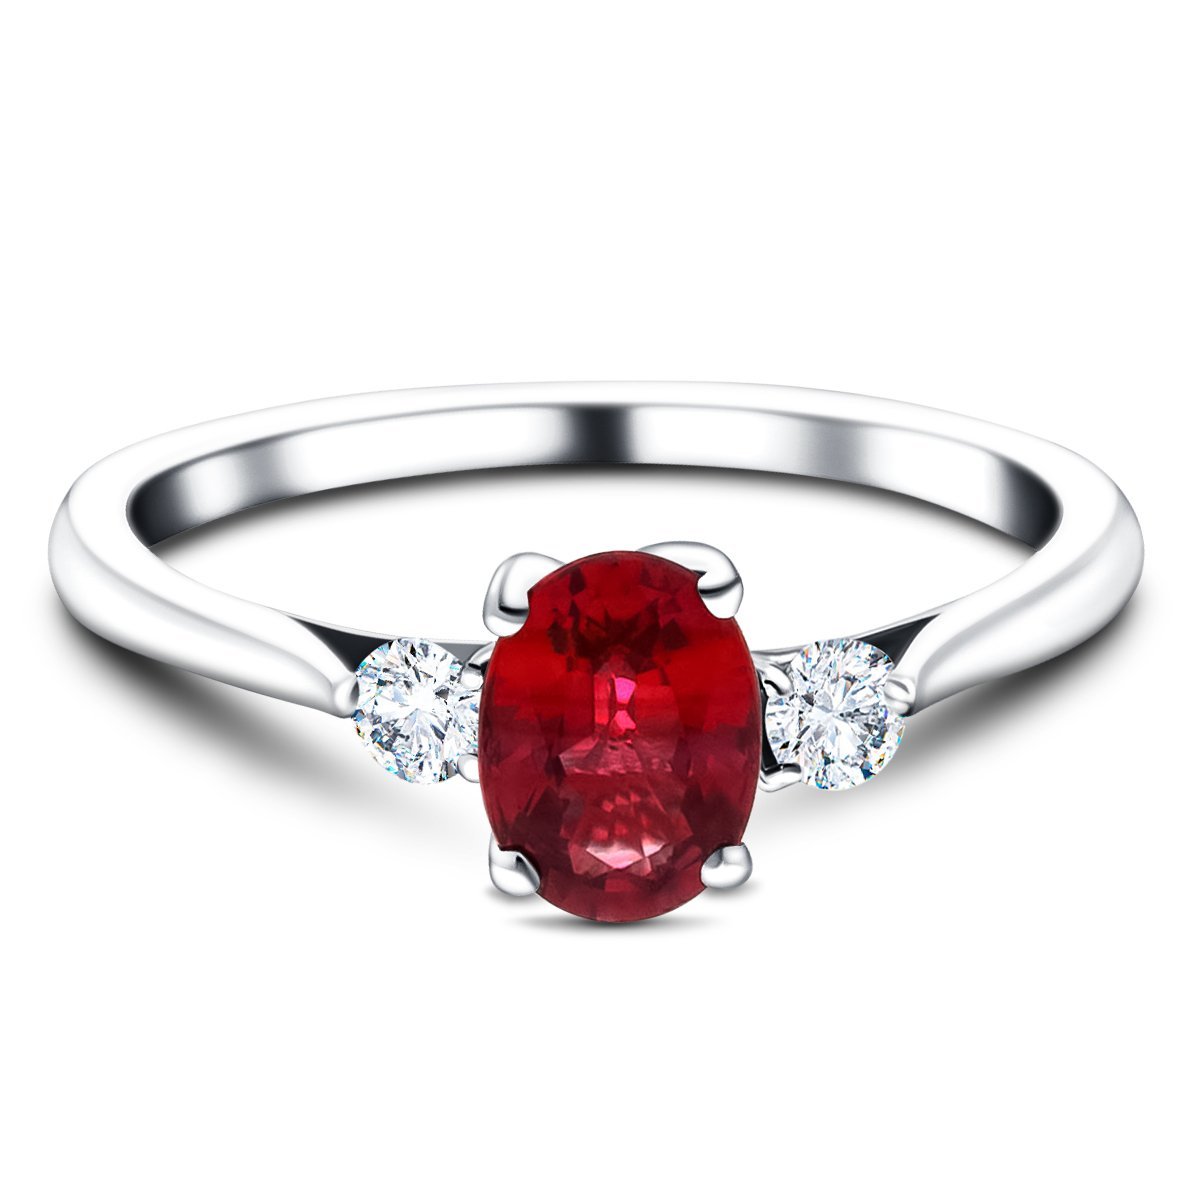 1.60ct Ruby with 0.25ct Diamond Trilogy Ring in 18k White Gold - All Diamond